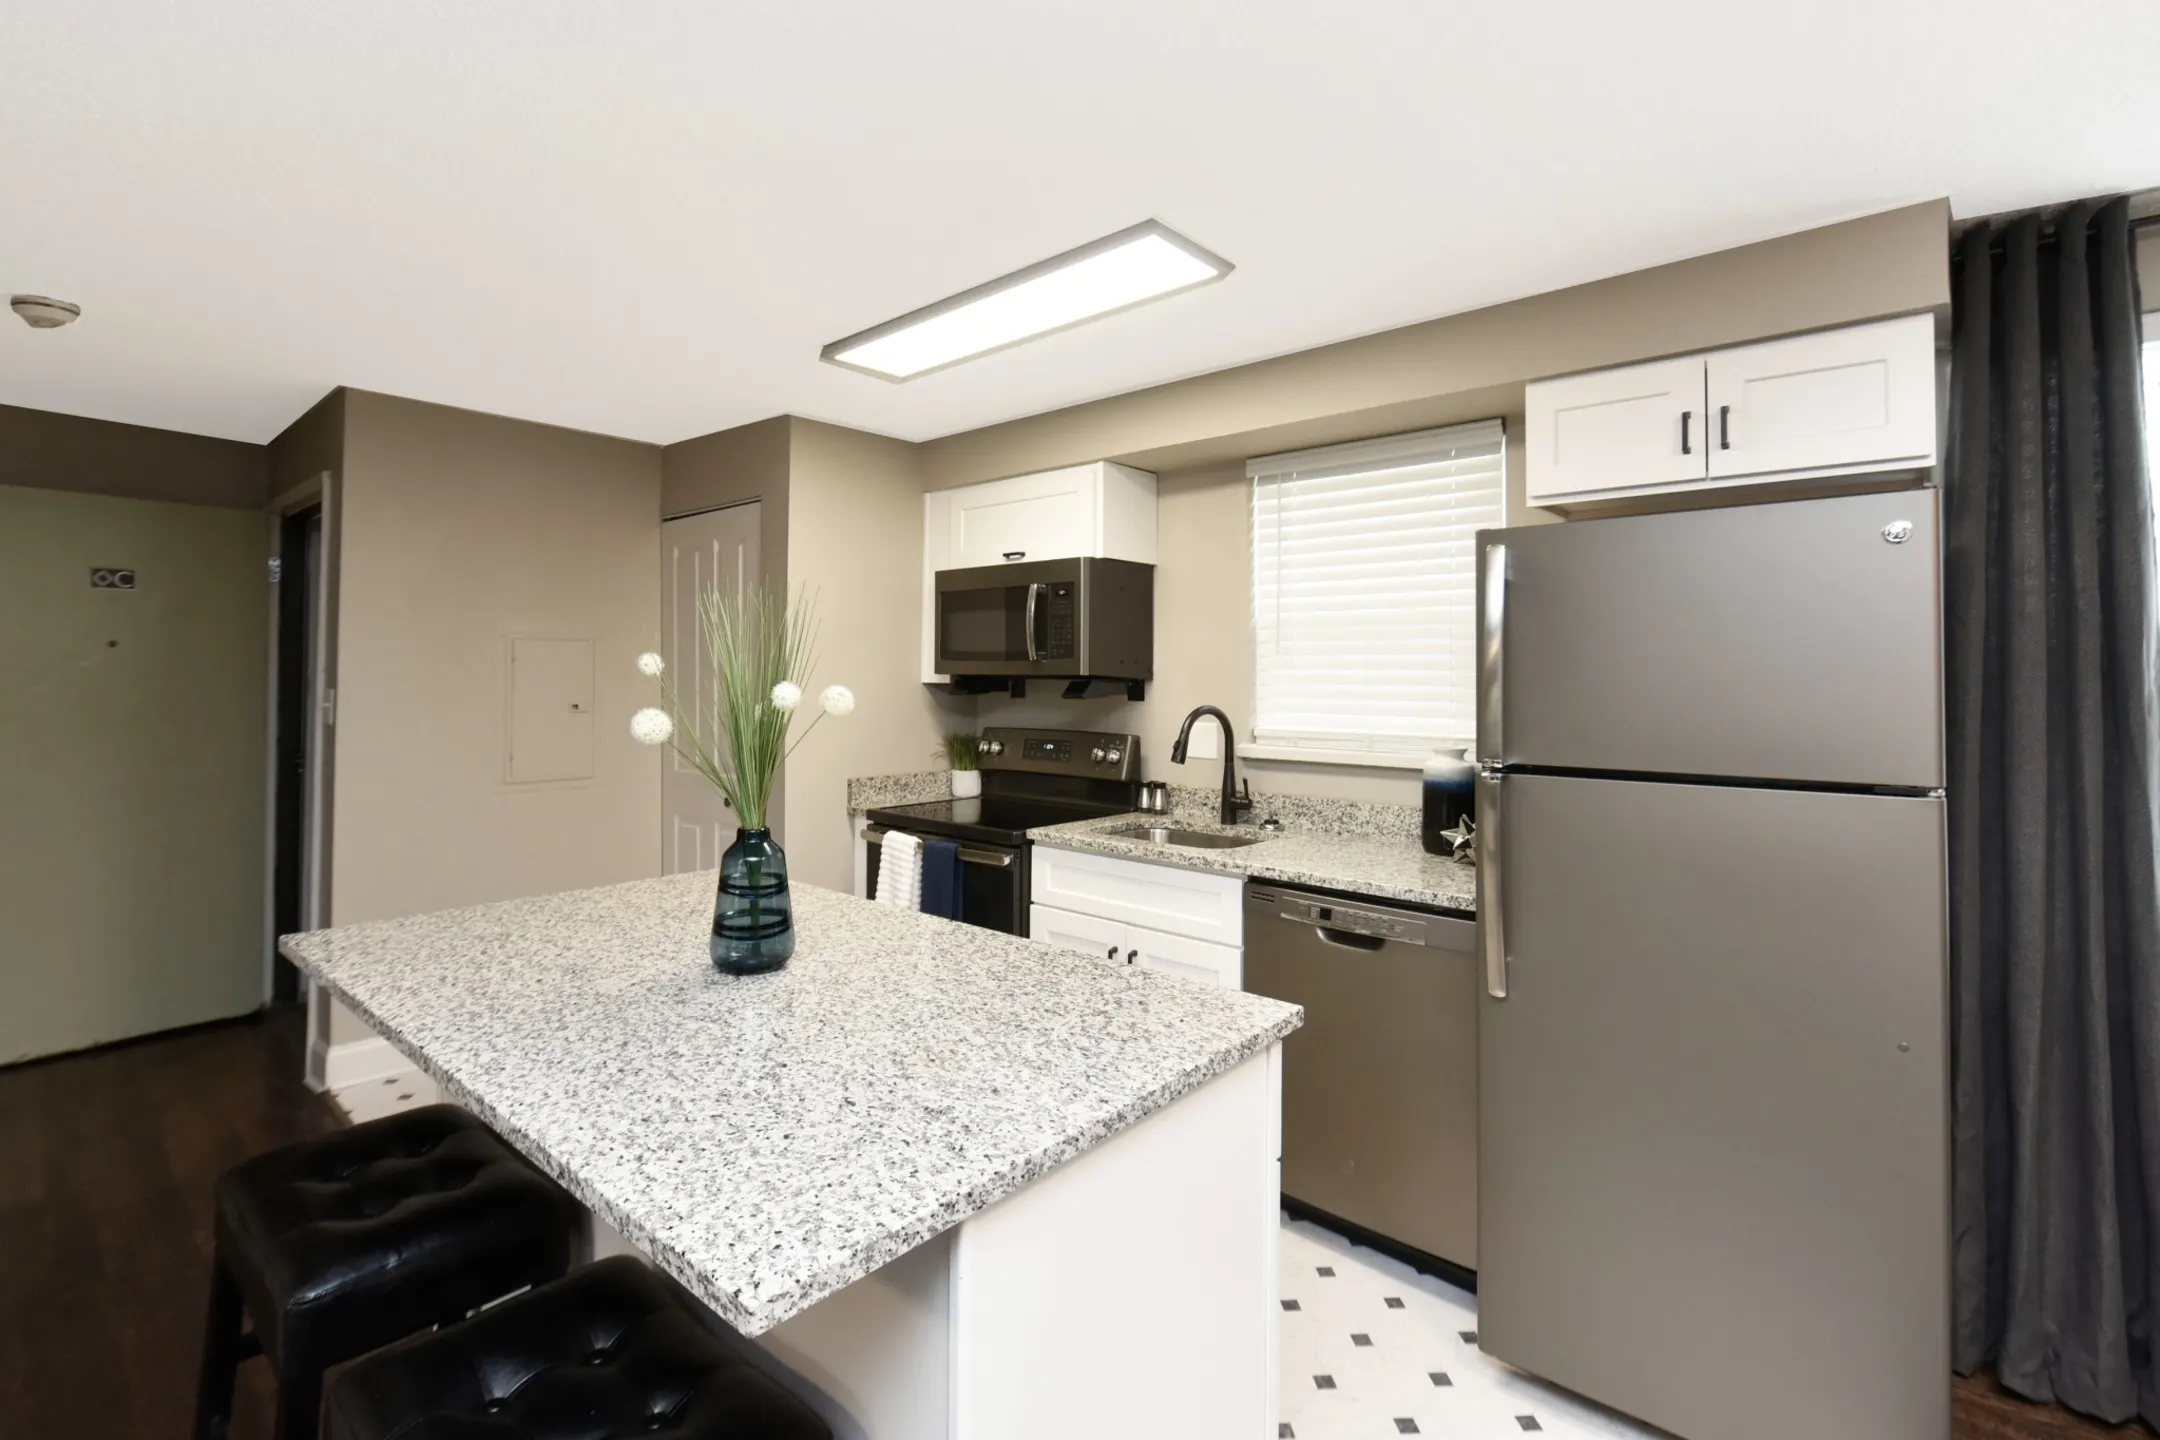 Kitchen - Emerson Apartments - Knoxville, TN